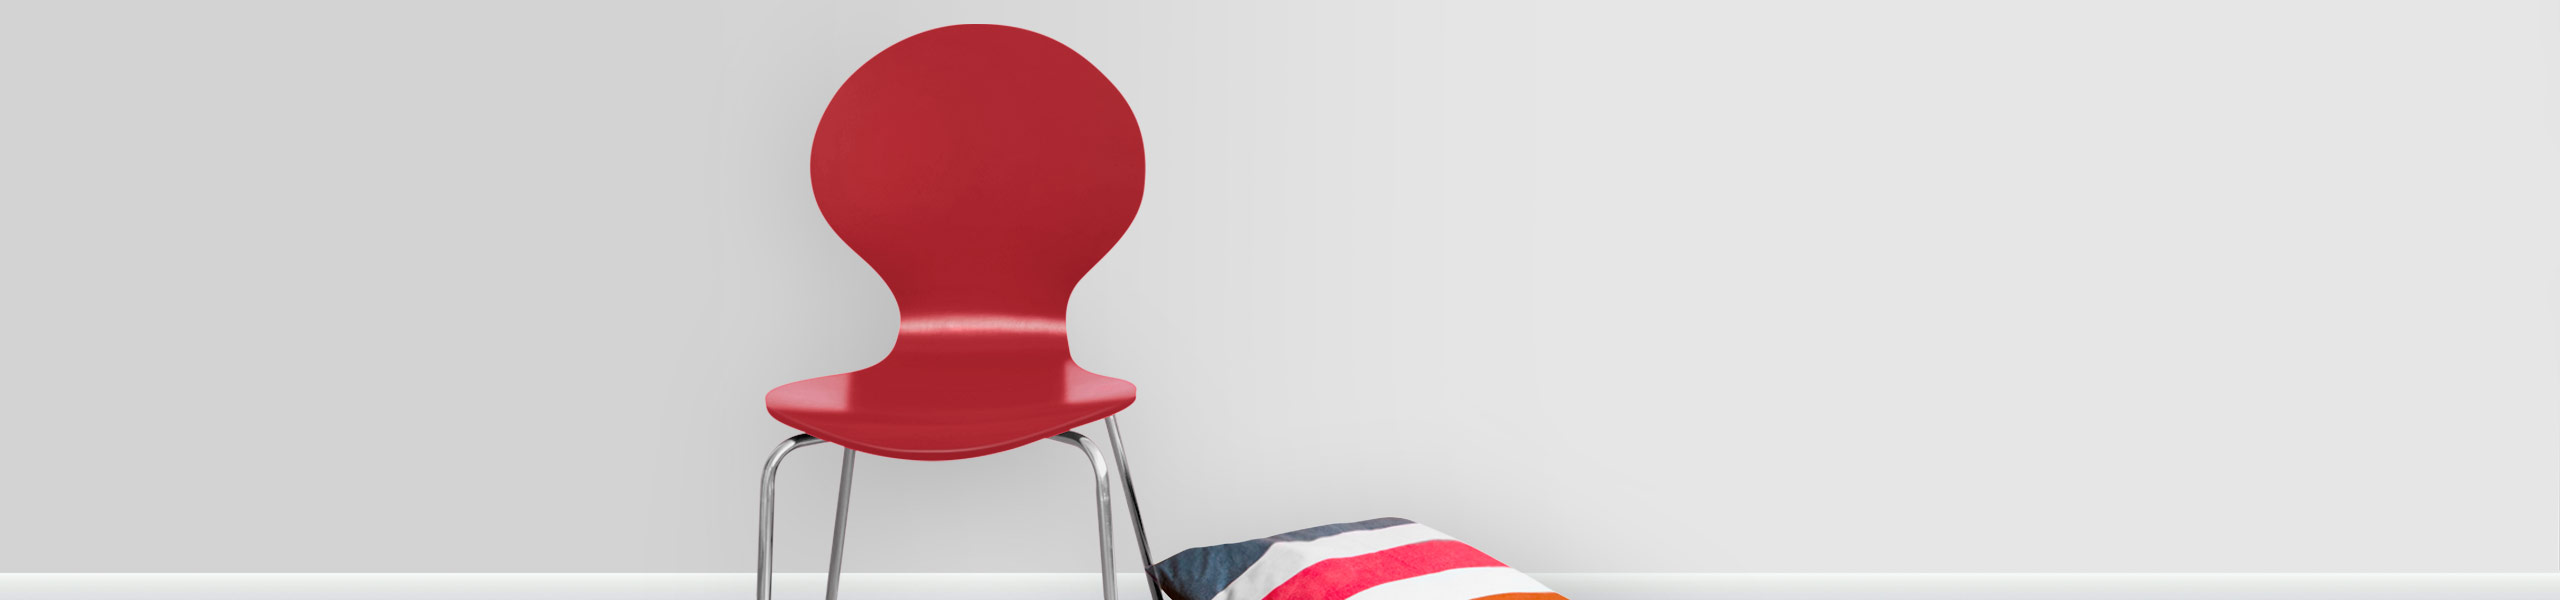 Candy Chair Red Video Banner